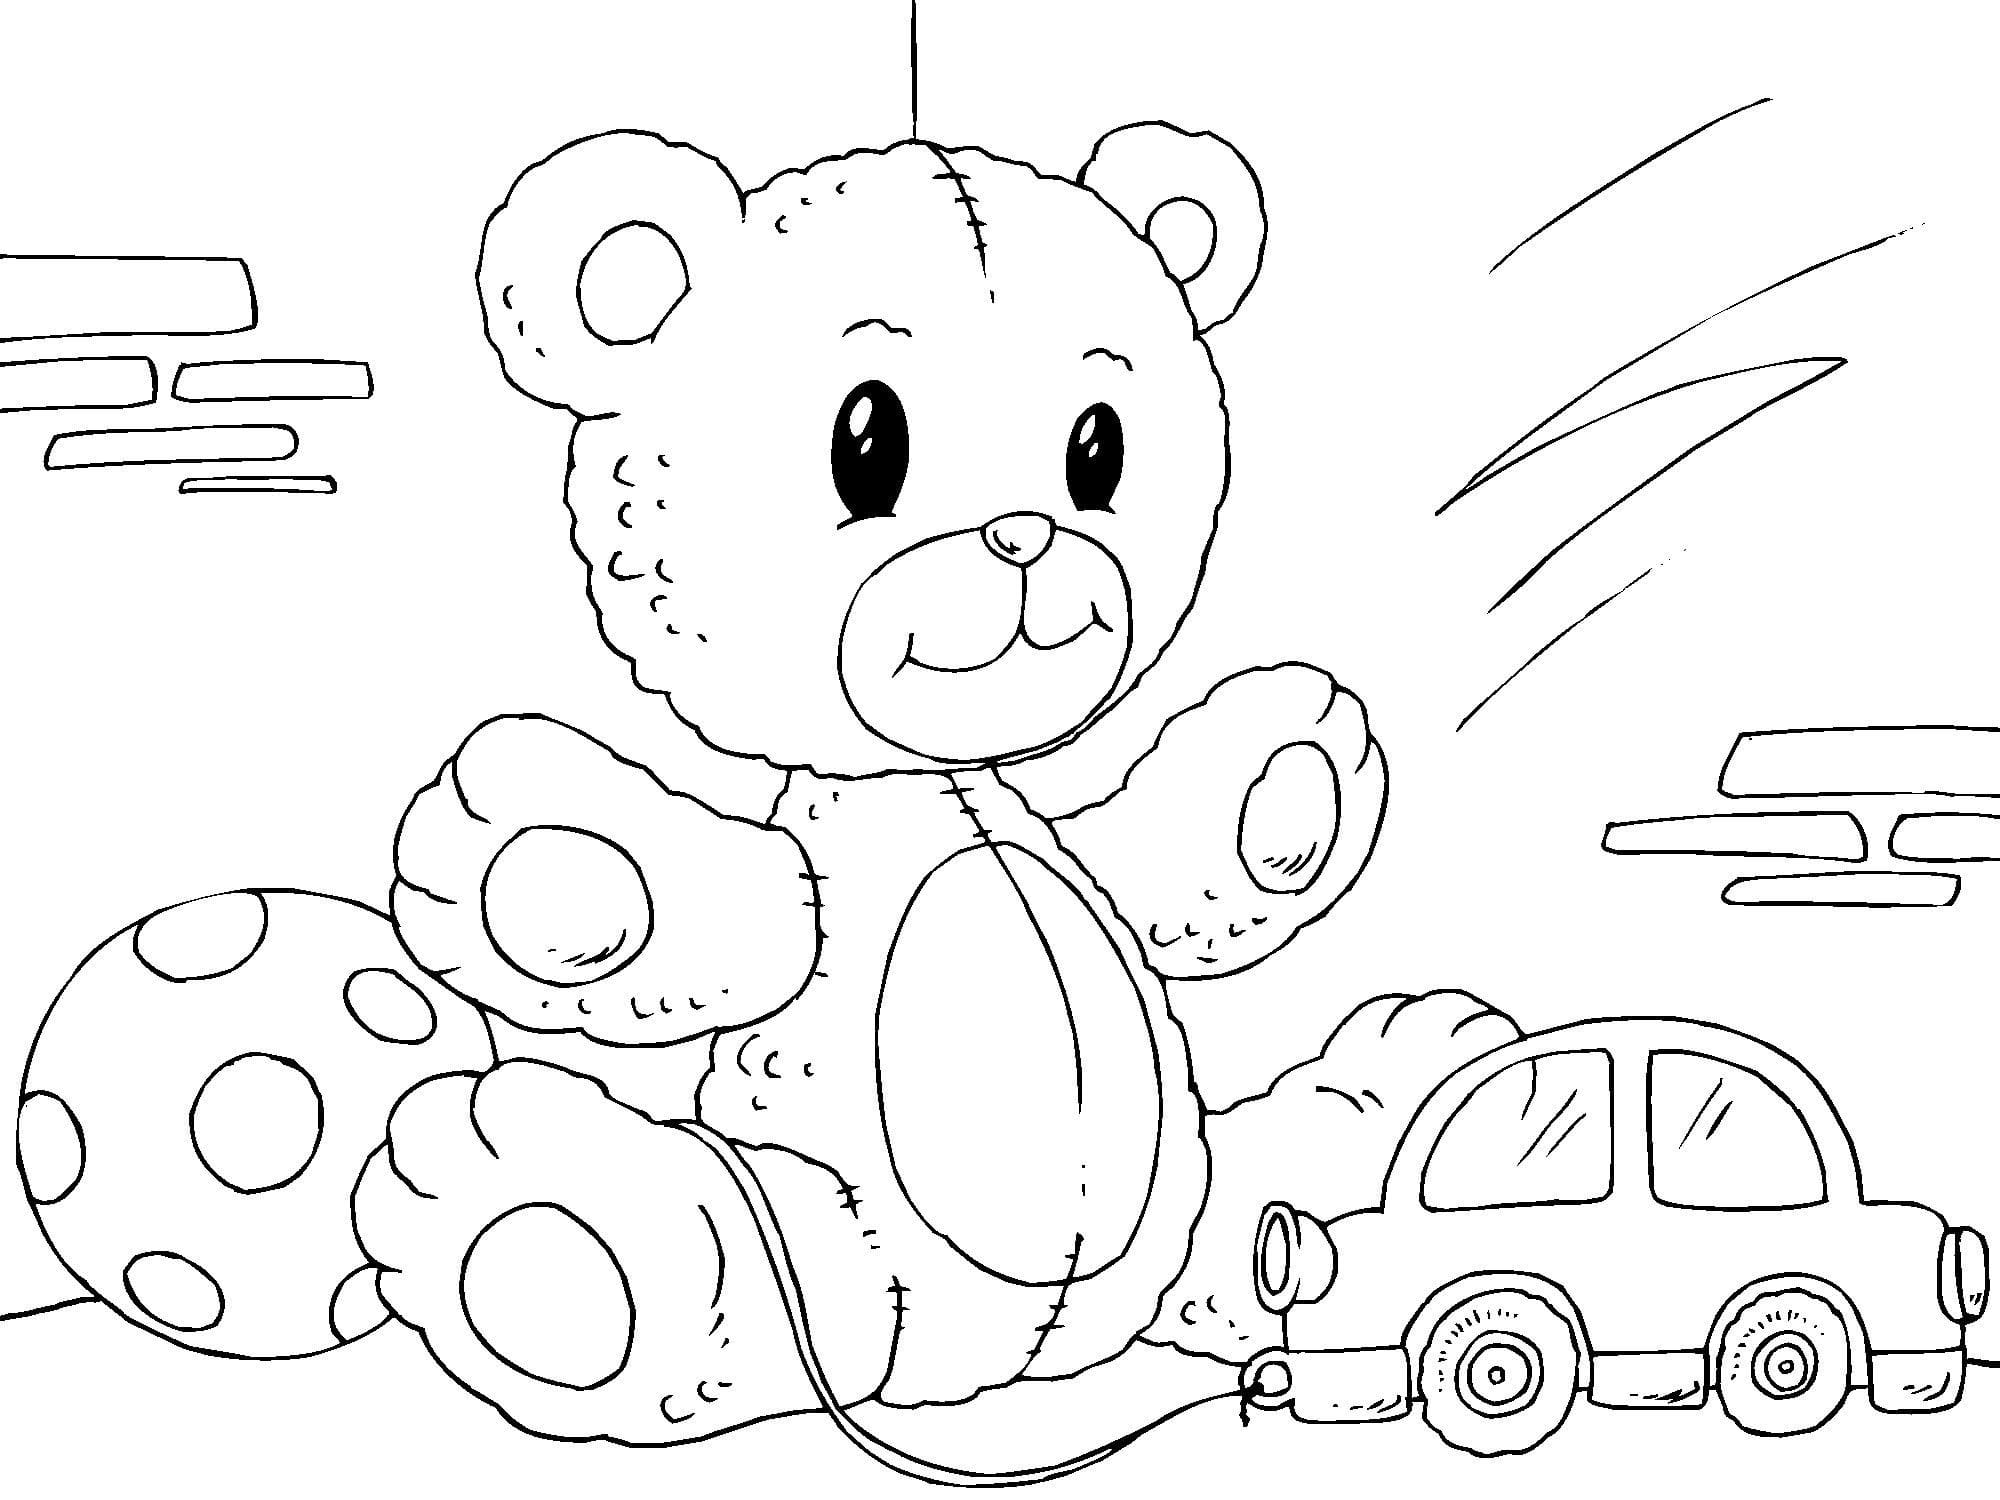 Coloring page Teddy Bears Teddy bear and toys